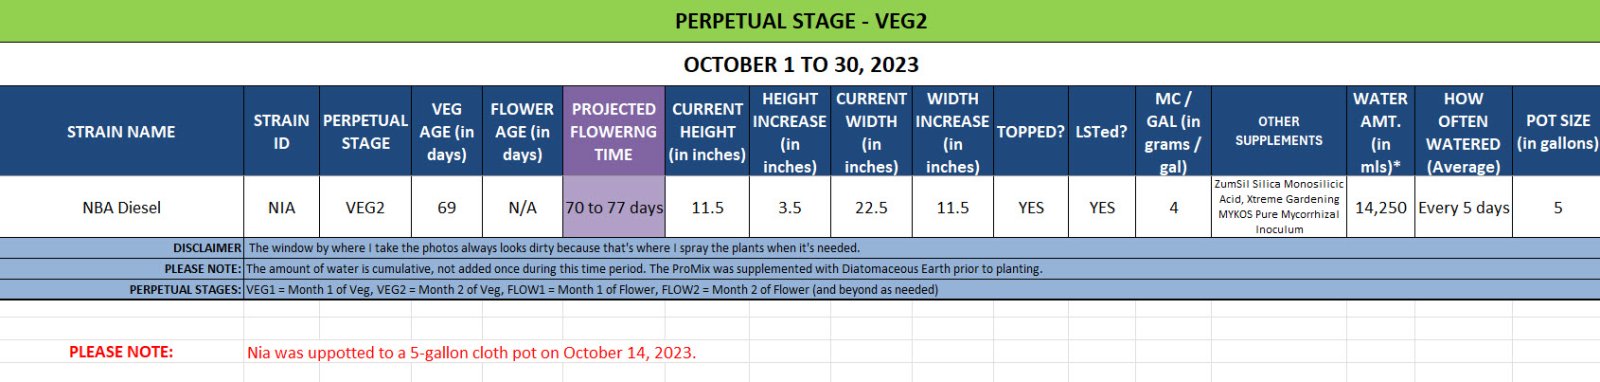 420 Update for Nia - October 1 to 30, 2023.jpg